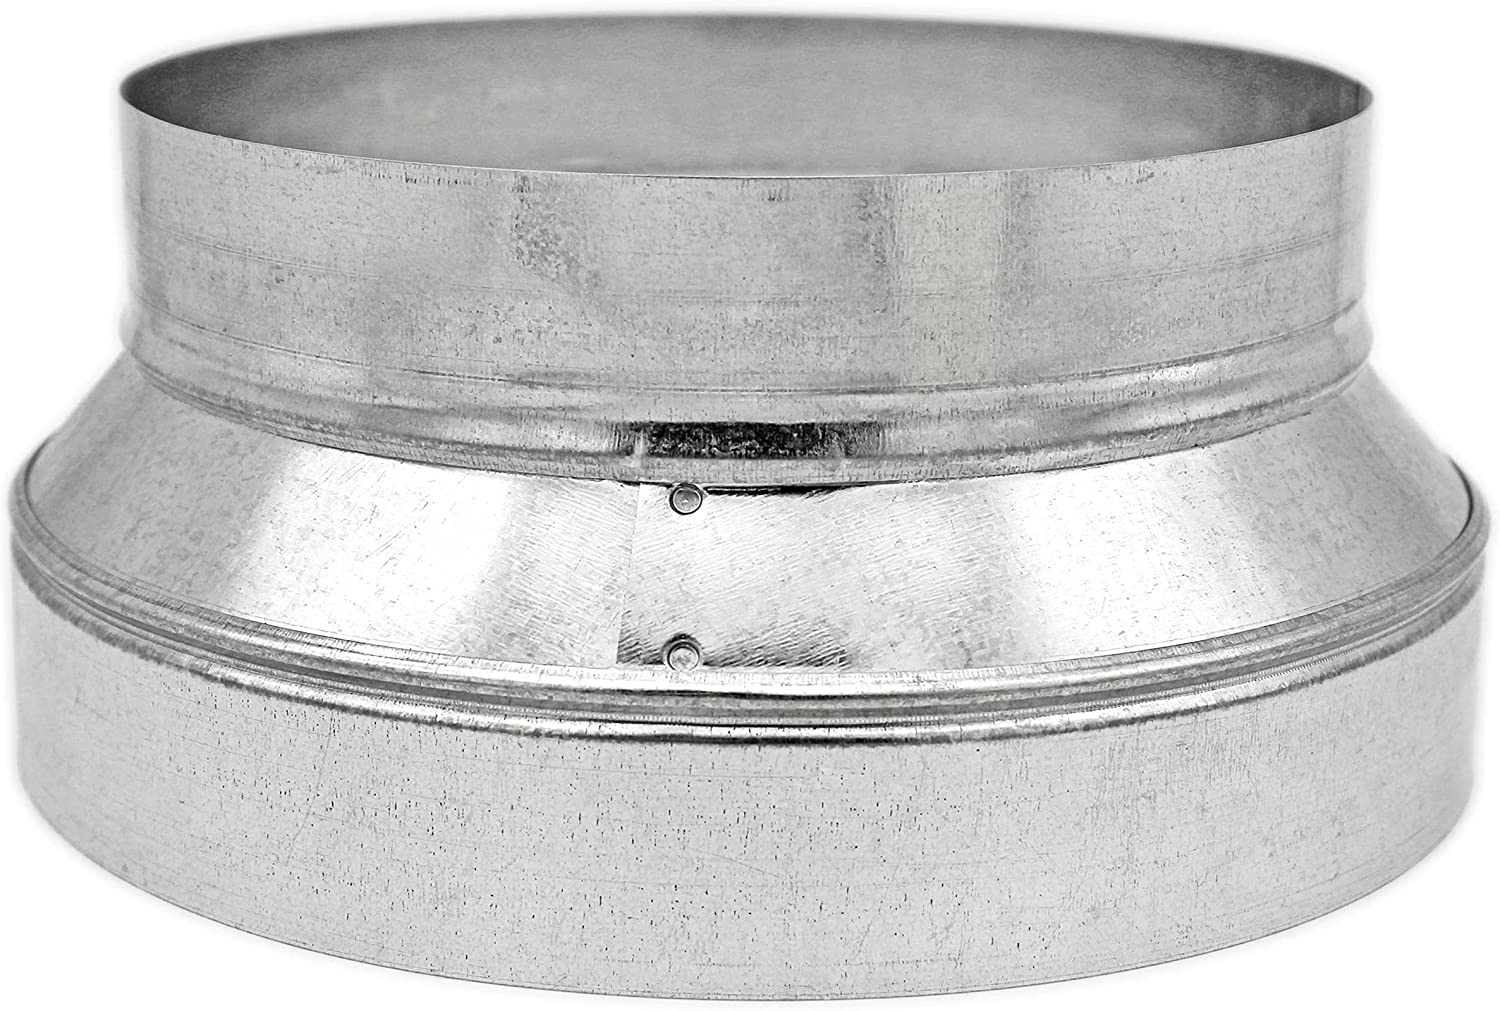 HVAC Premium Round Metal Pipe Reducer & Increaser | 12" to 10" HVAC Duct Reducer or Increaser 30g Gauge | Galvanized Sheet Metal Ducting Connector is Compatible with Duct 10"